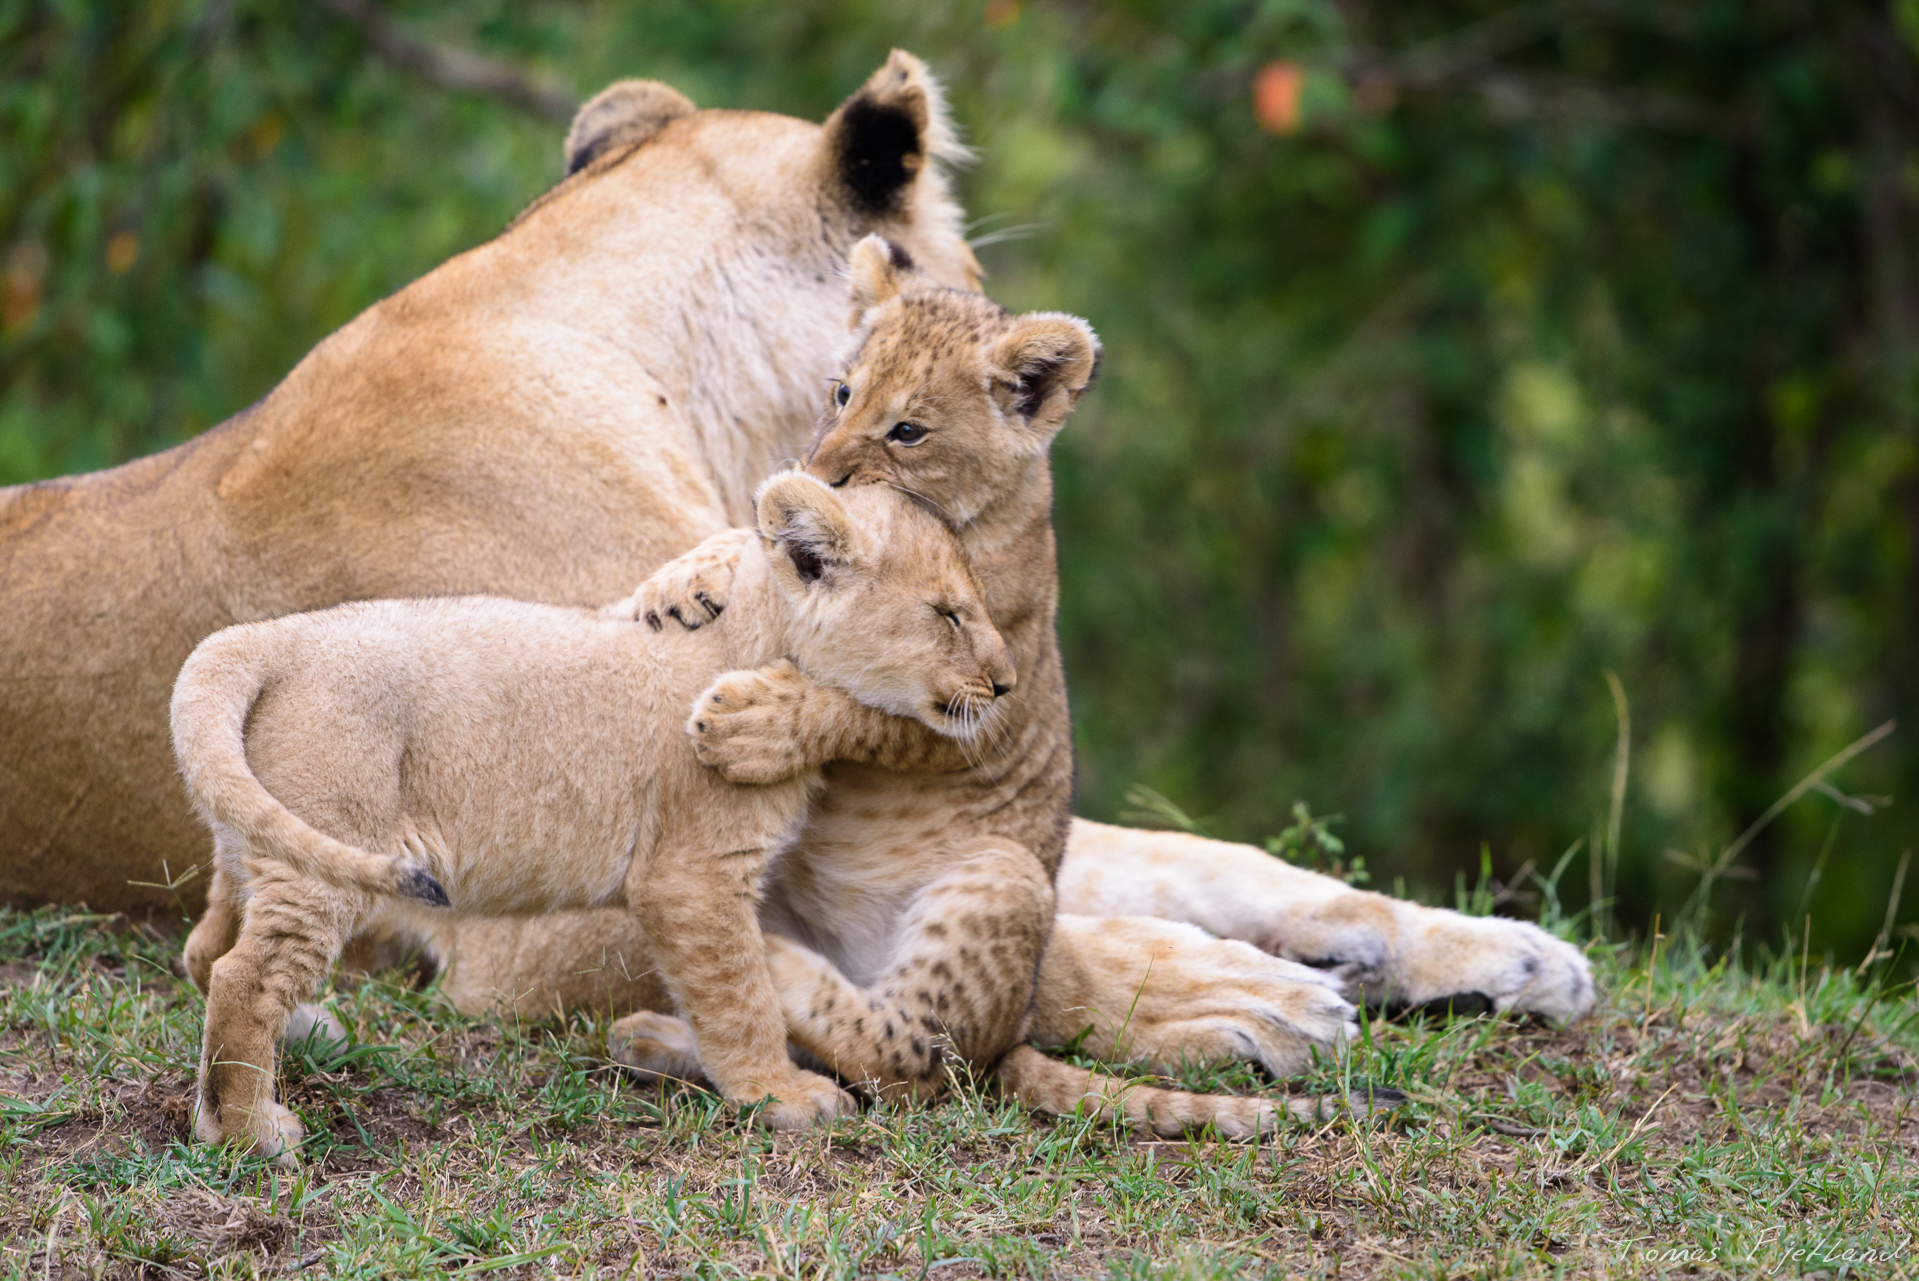 Cubs are training their hunting skills on eachother while the mother keeps watch.